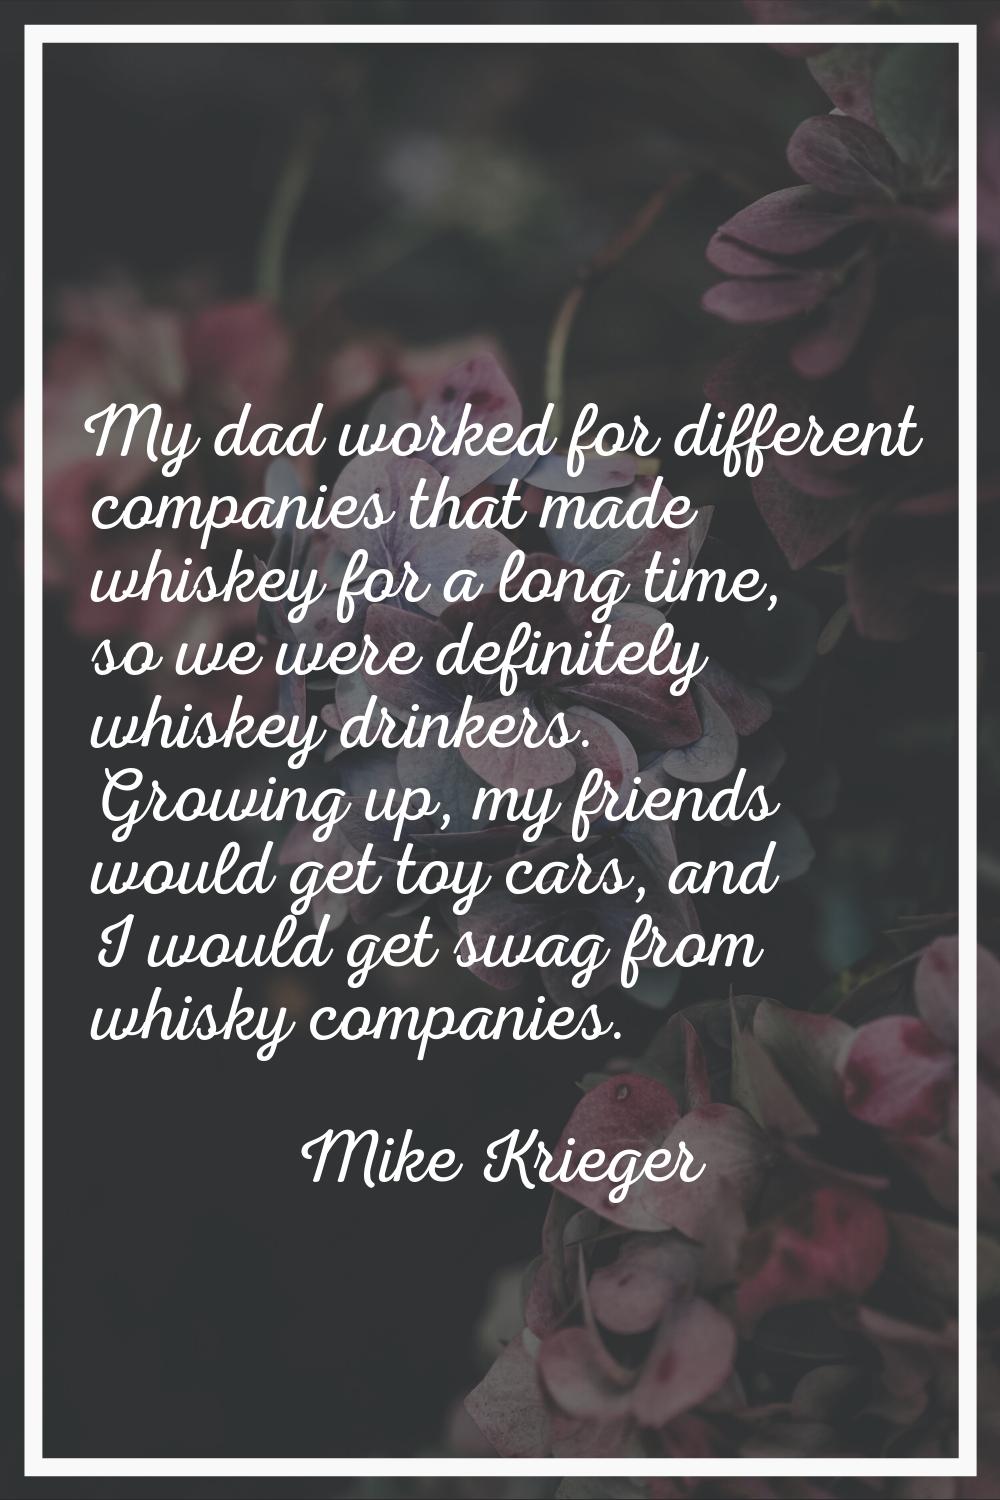 My dad worked for different companies that made whiskey for a long time, so we were definitely whis